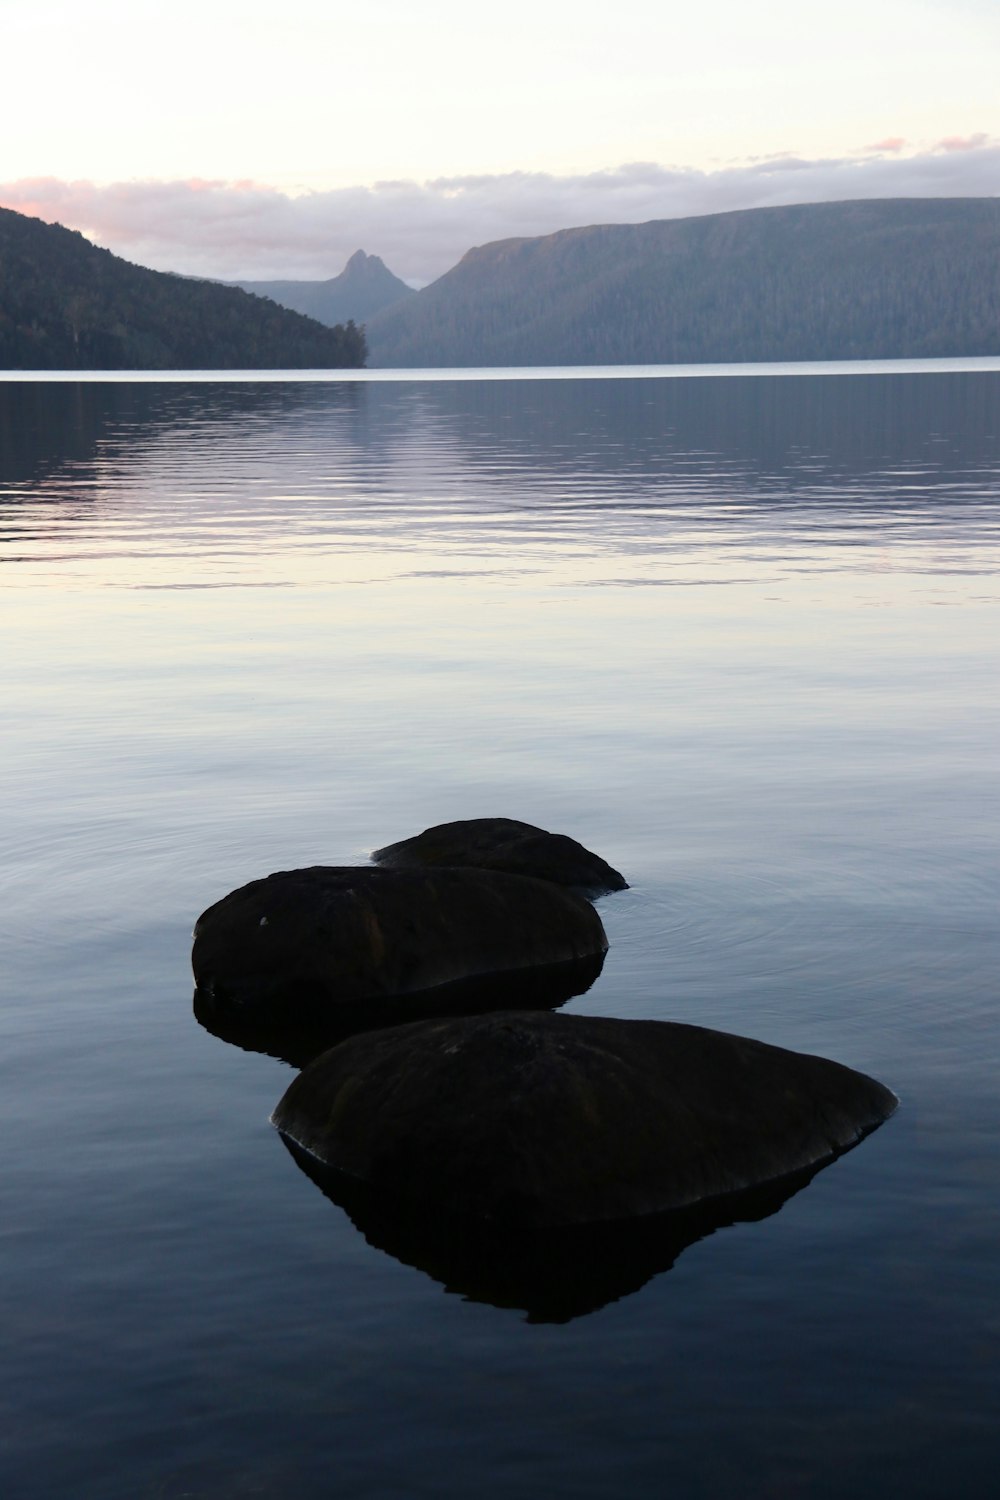 two rocks in the water with mountains in the background